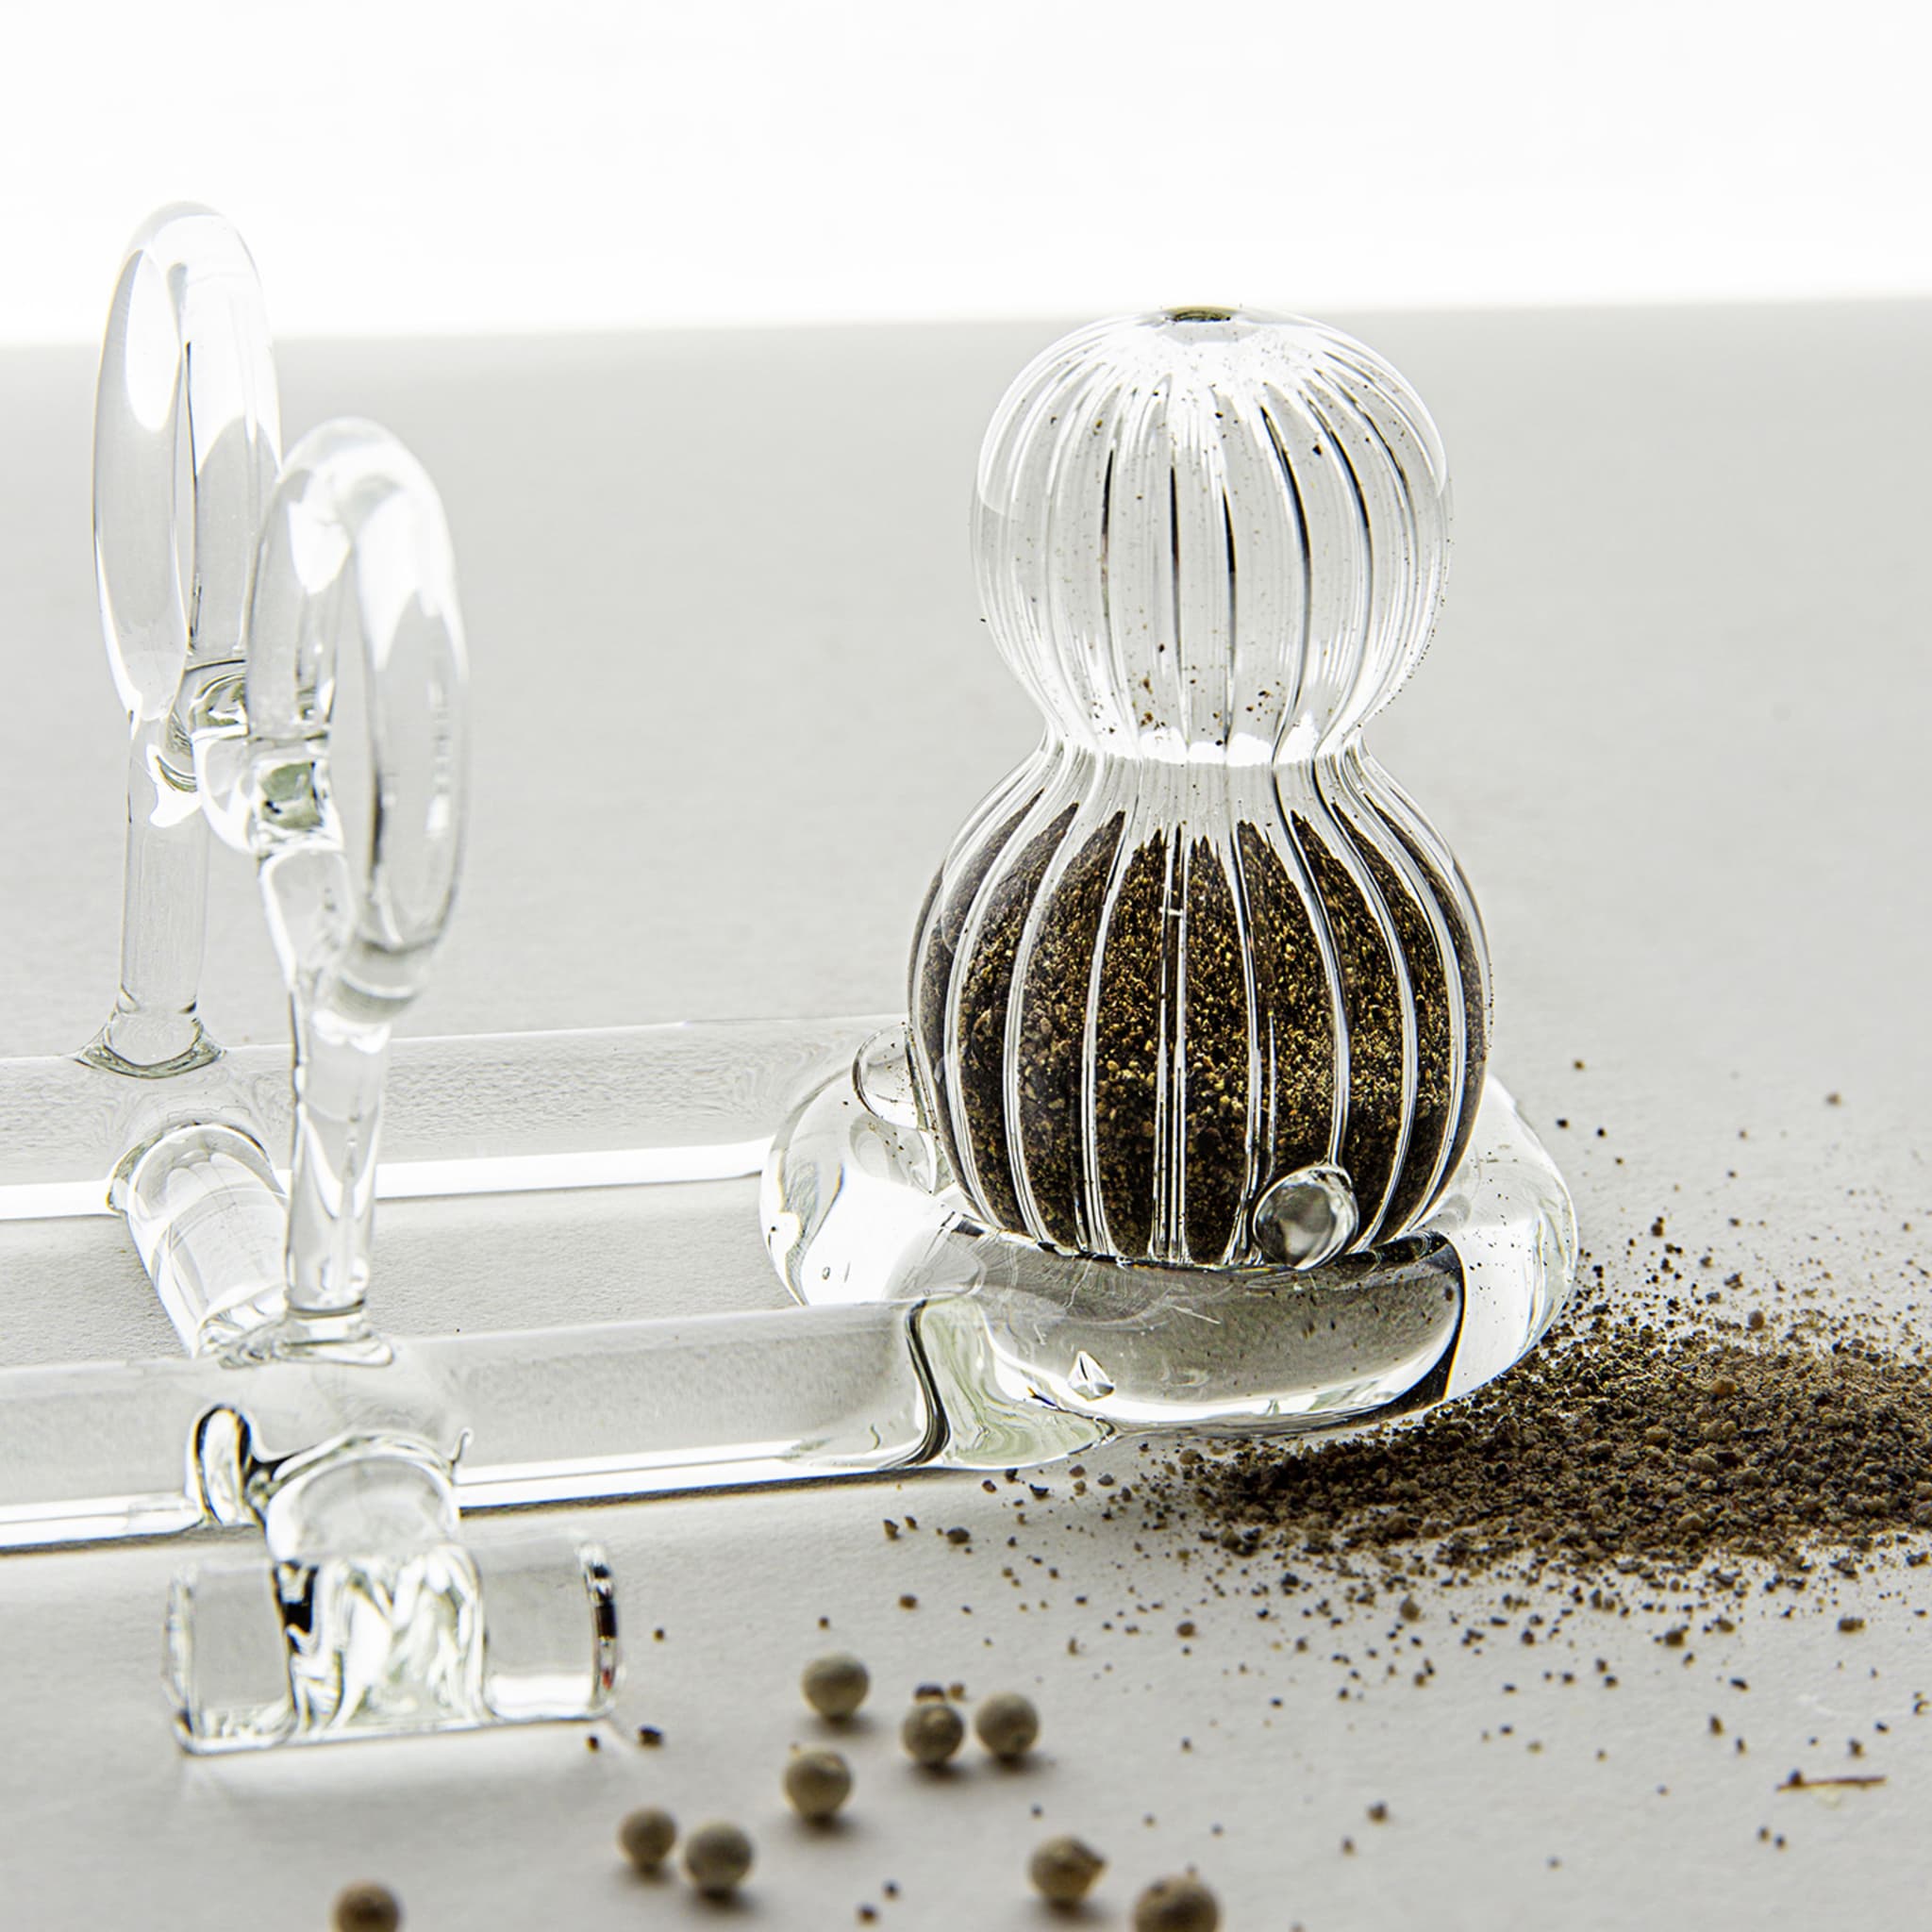 Salt & Pepper - SiO2 Tableware Glass Collection - Alternative view 1